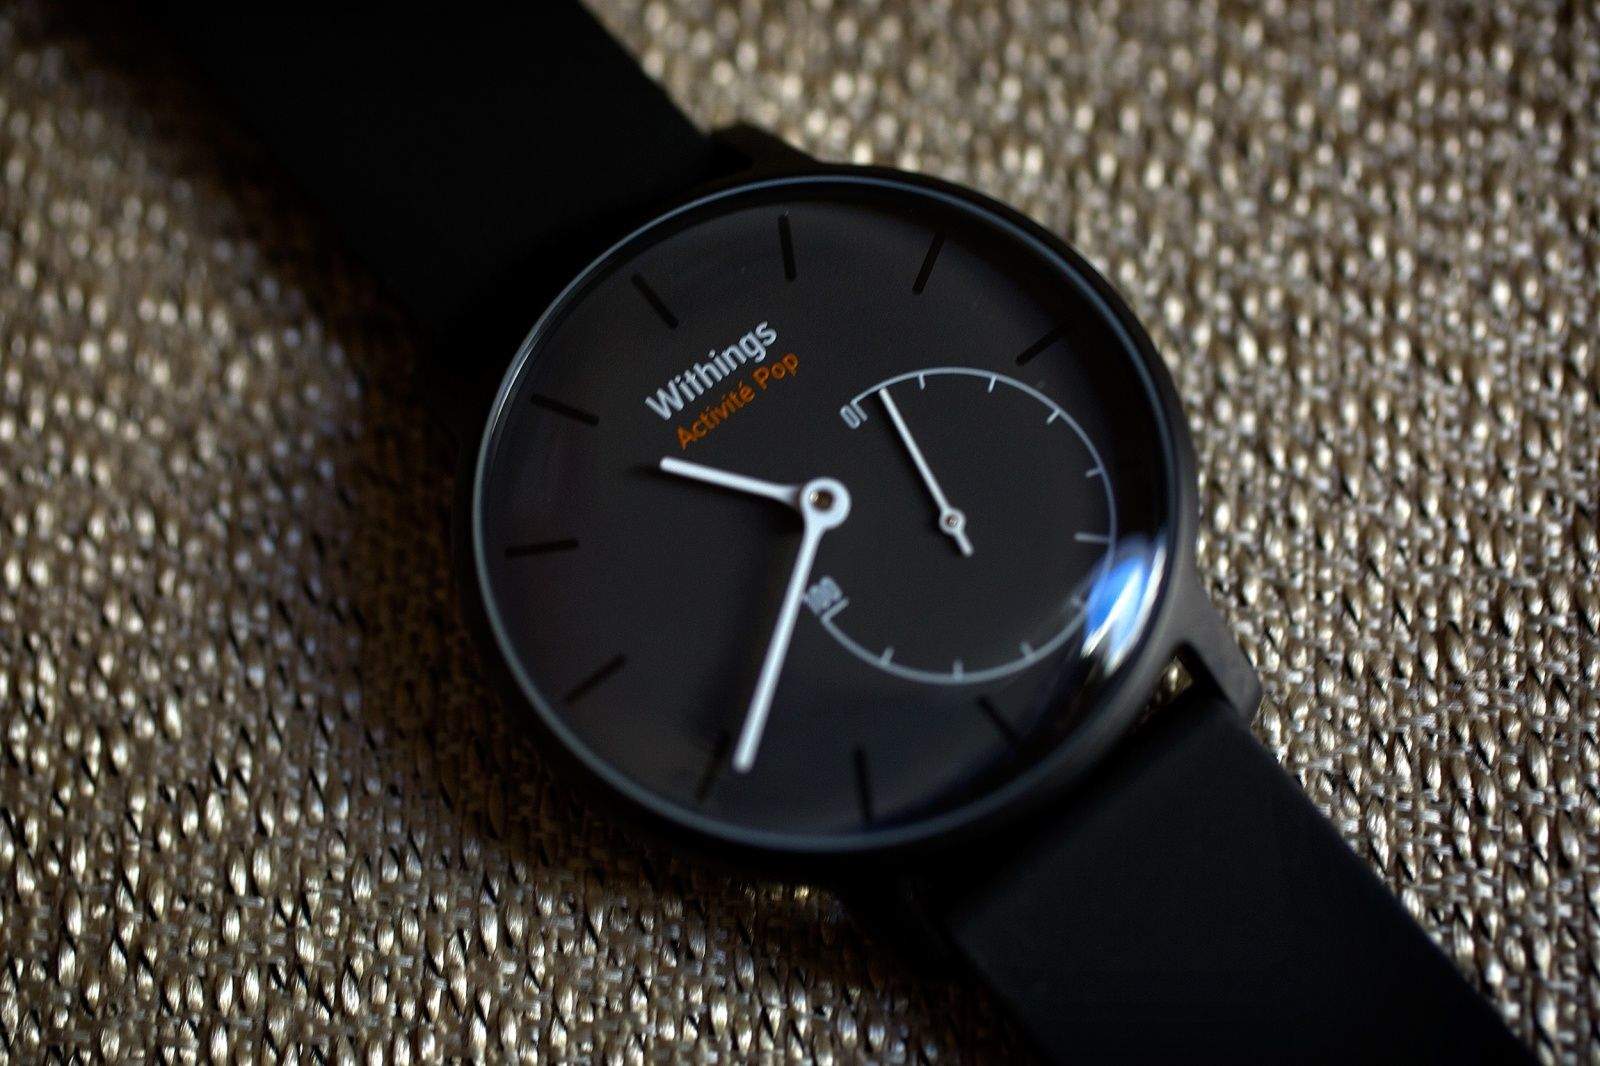 Withings smart watch is one of the best looking wearables around. Photo: Jim Merithew/Cult of Mac